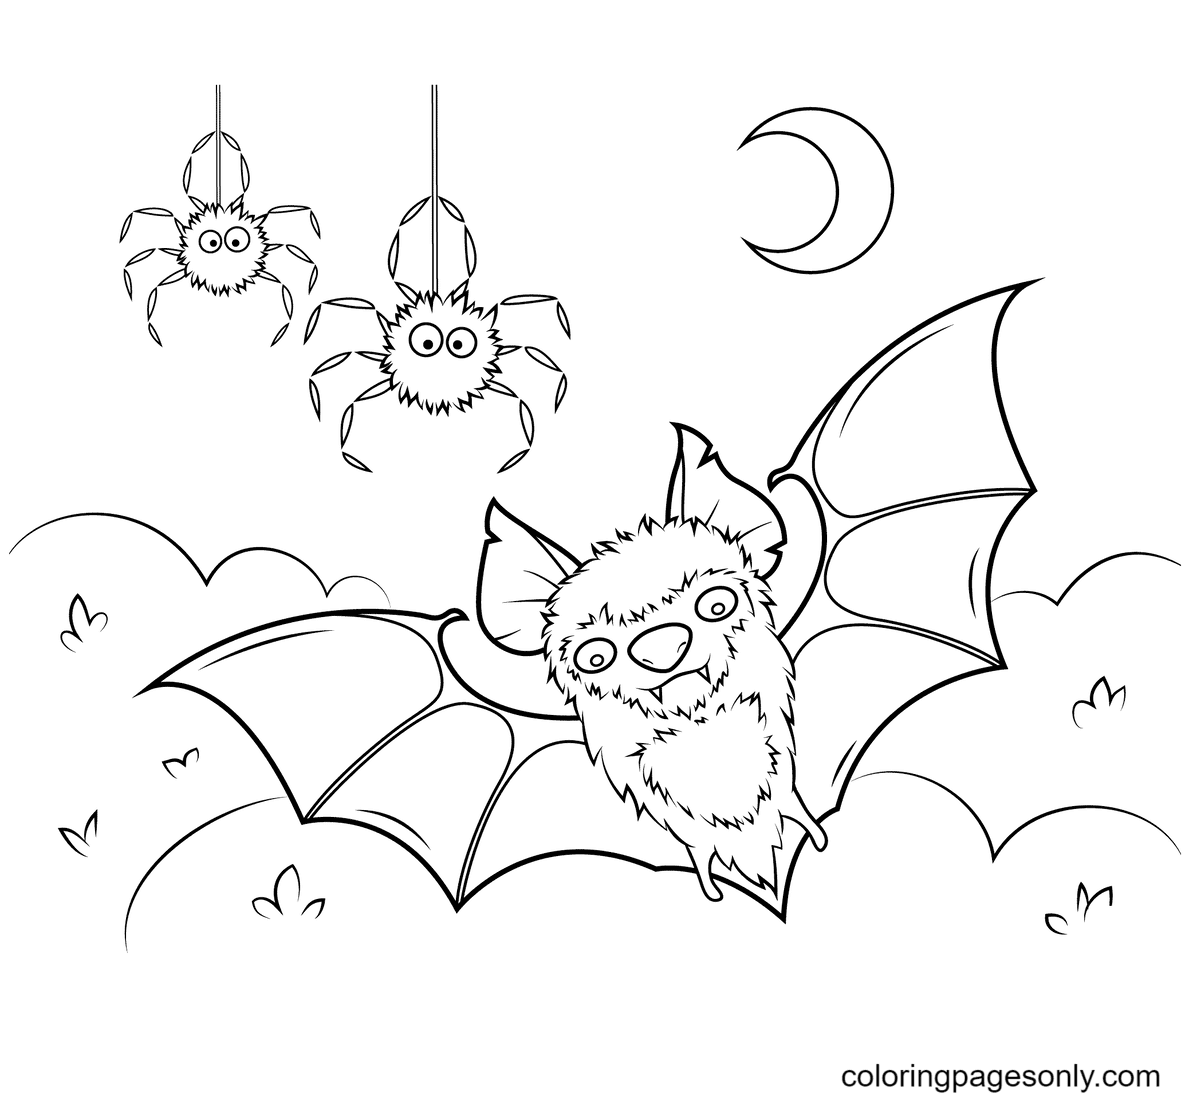 Bat and Spiders Coloring Page